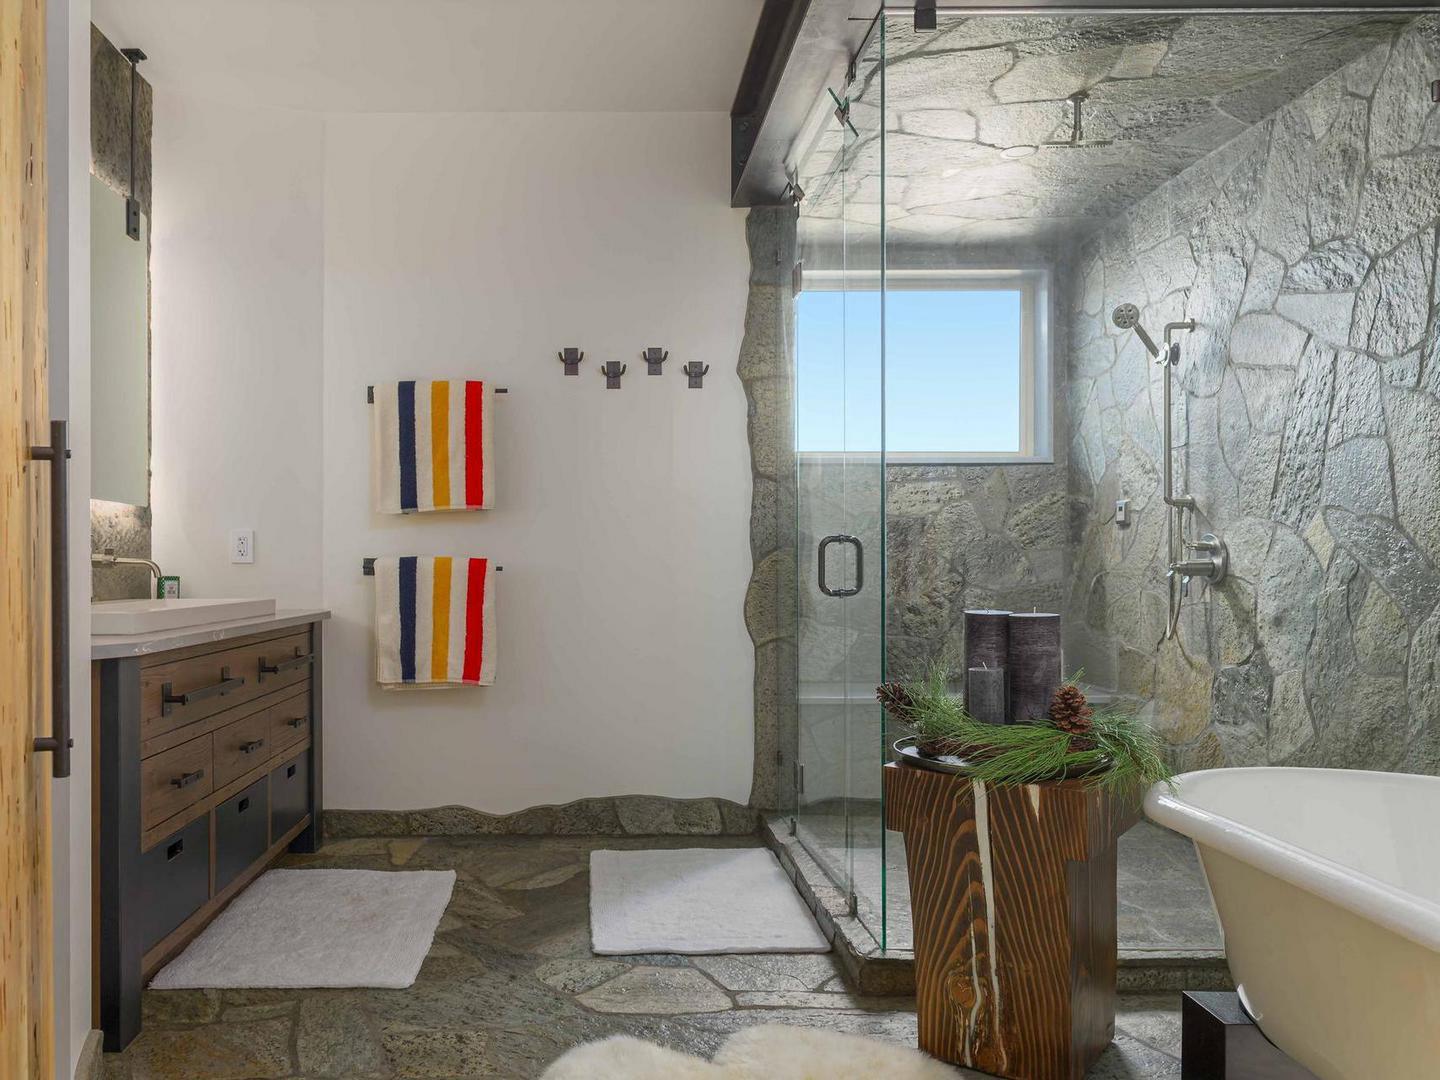 A large and spacious luxury bathroom with a walk-in shower and soaker tub, with stone accents and bright lighting, in one of Luxury Vacation Rentals' luxury properties at Big White Ski Resort.